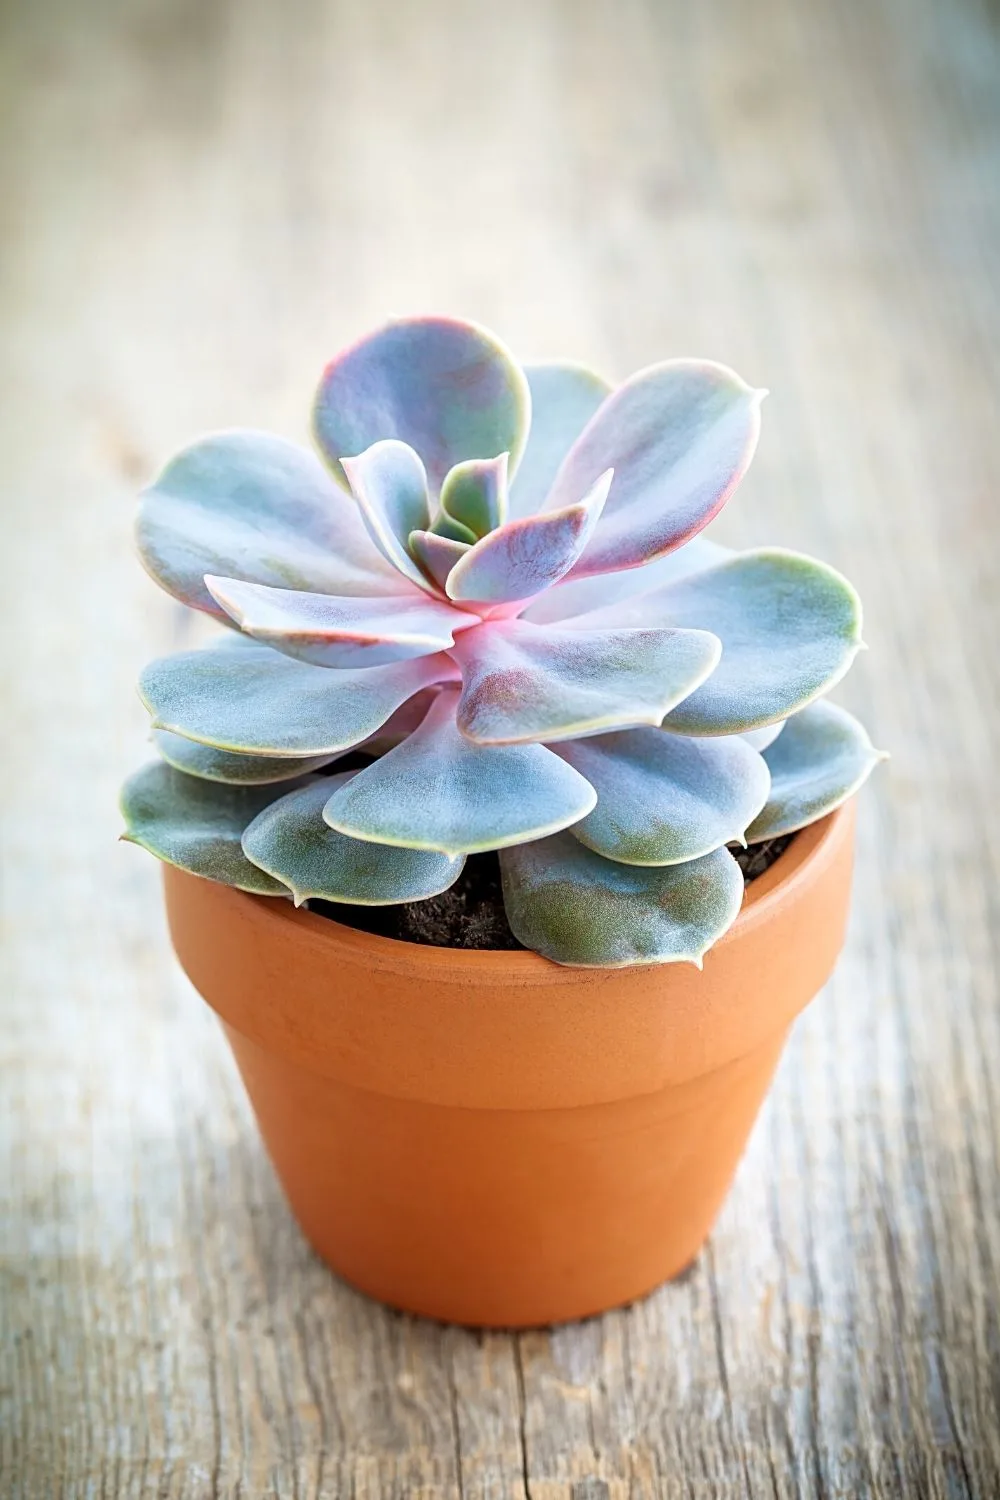 Echeveria prefers to grow in direct sunlight, but can thrive in bright yet indirect light as well